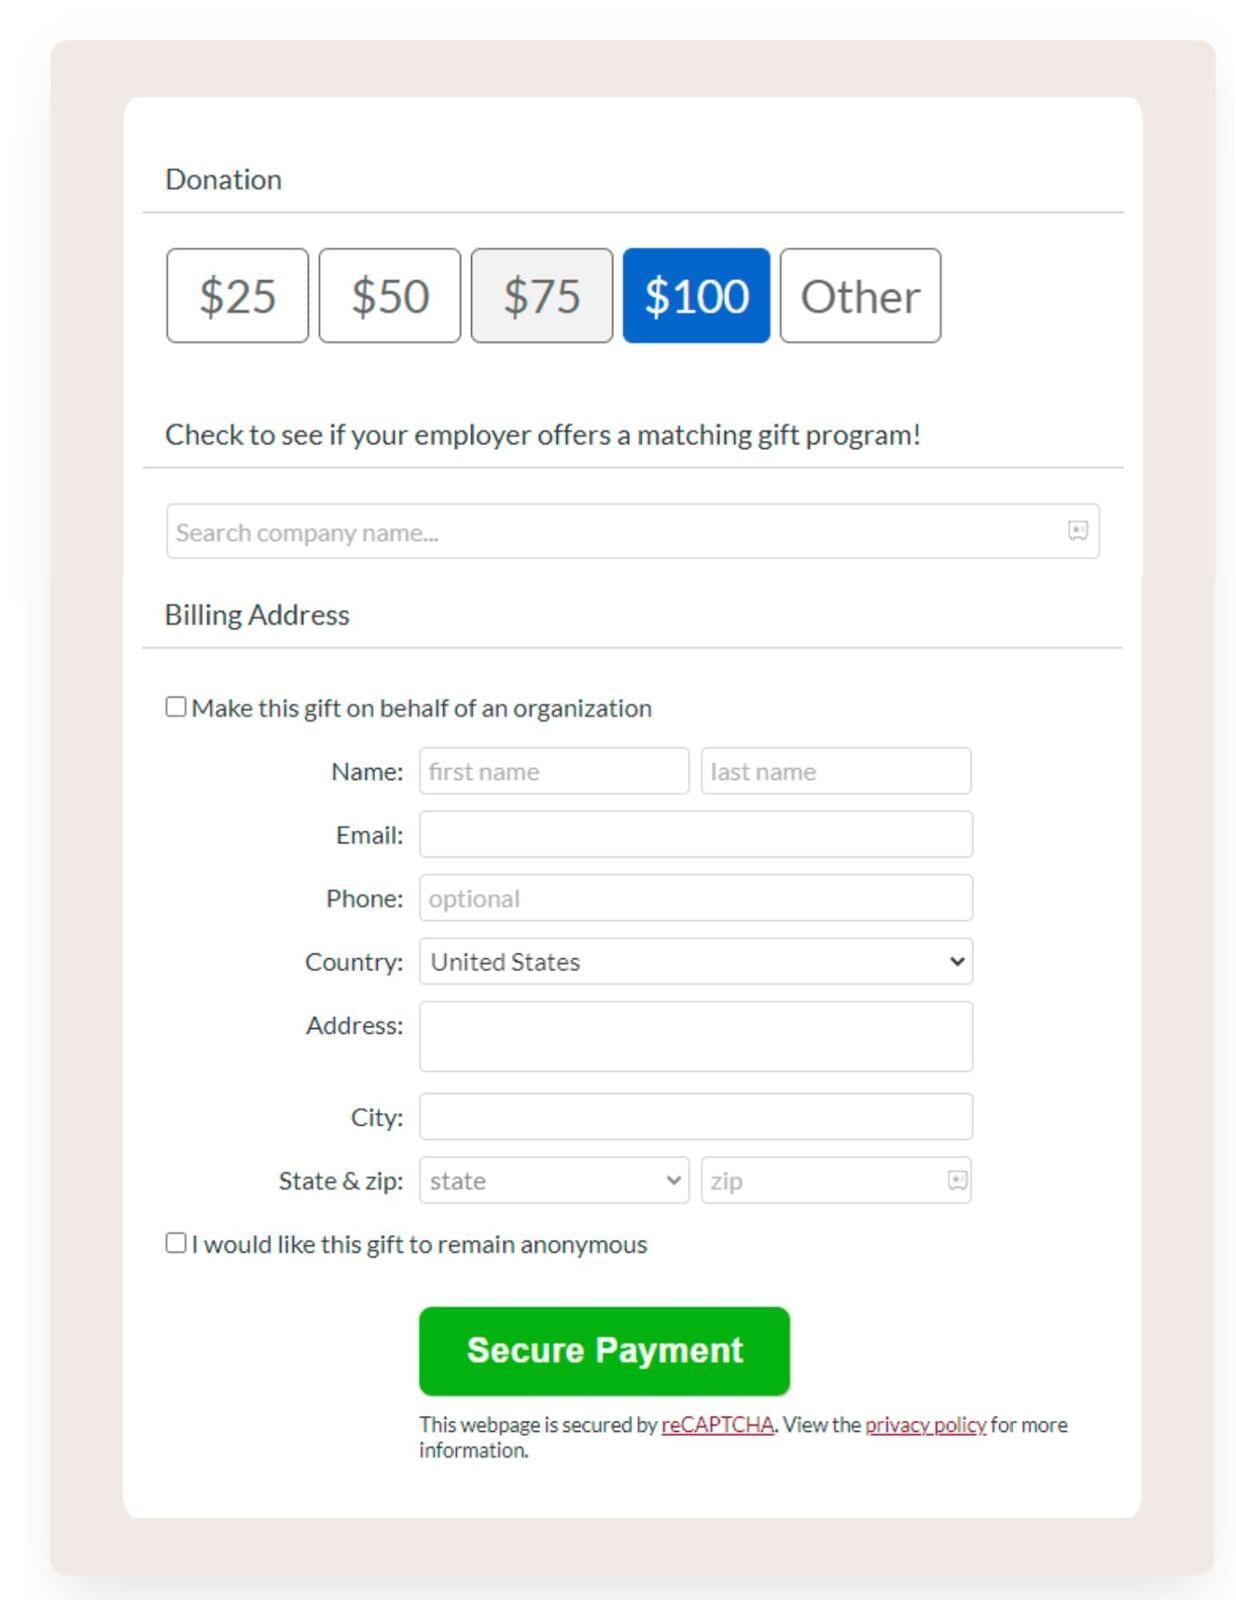 OnlineExpress Donation form example